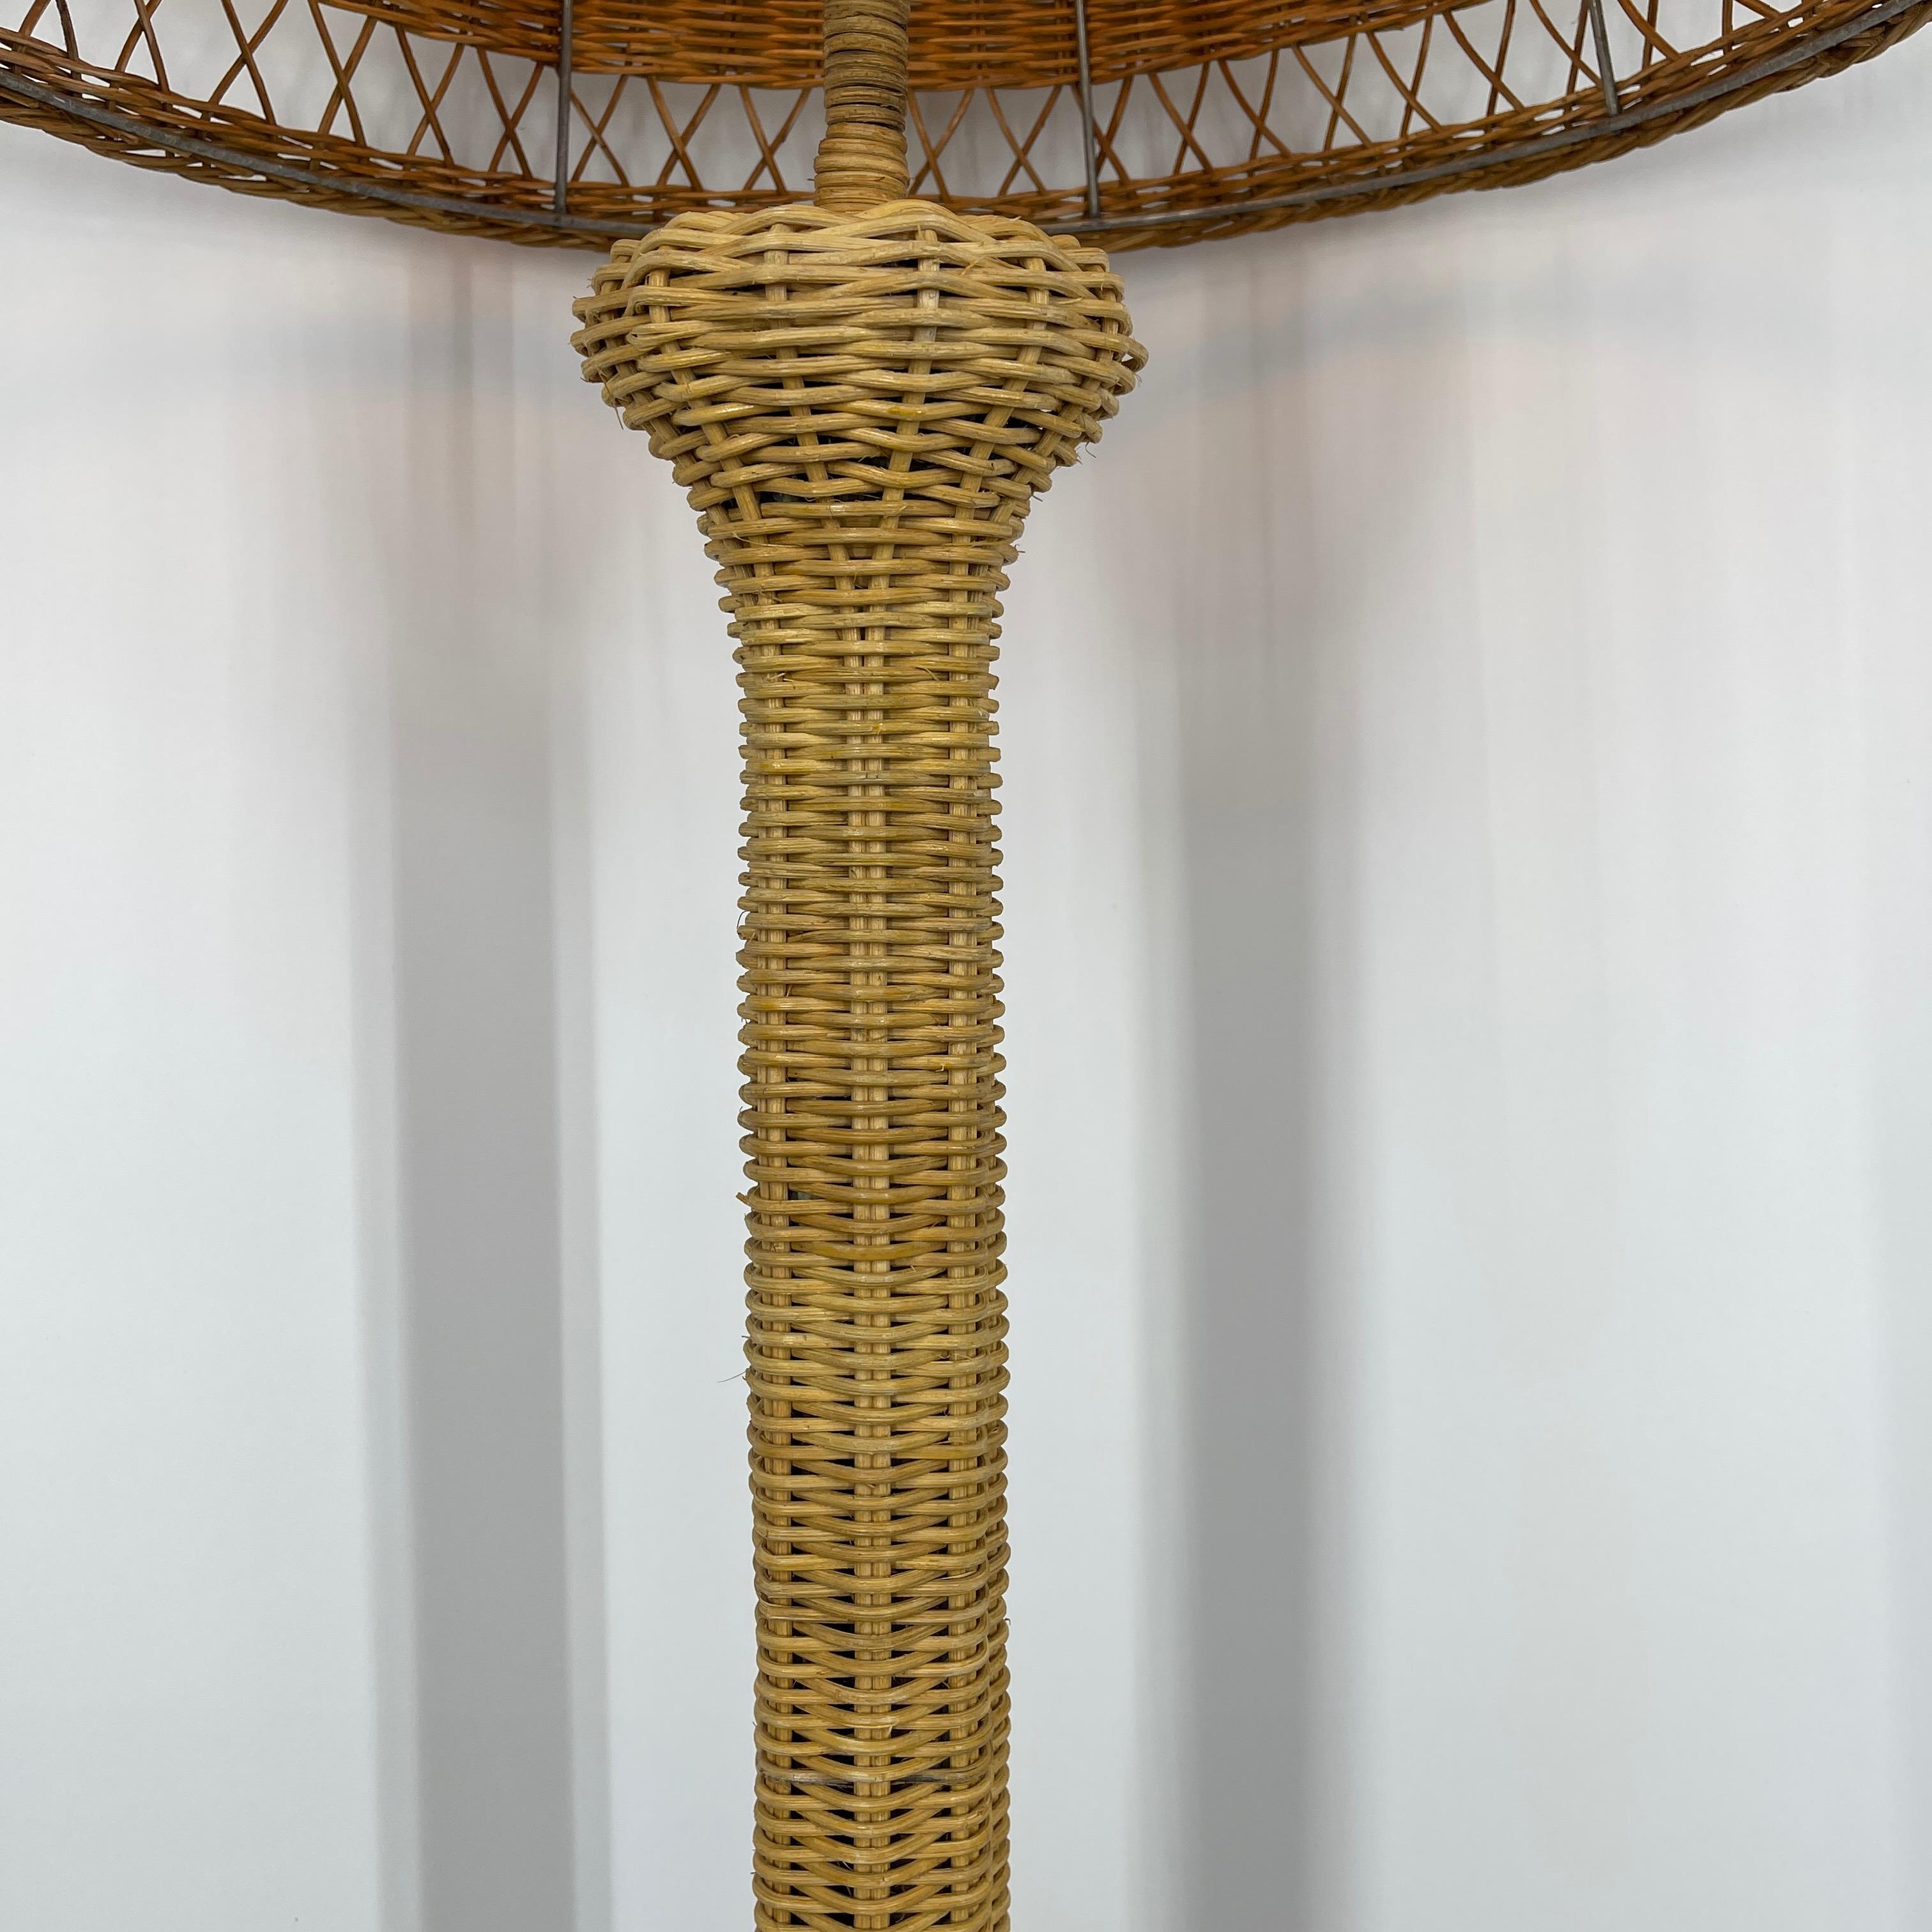 Hand-Crafted Mid-Century Modern Wicker Floor Lamp with Wicker Shade